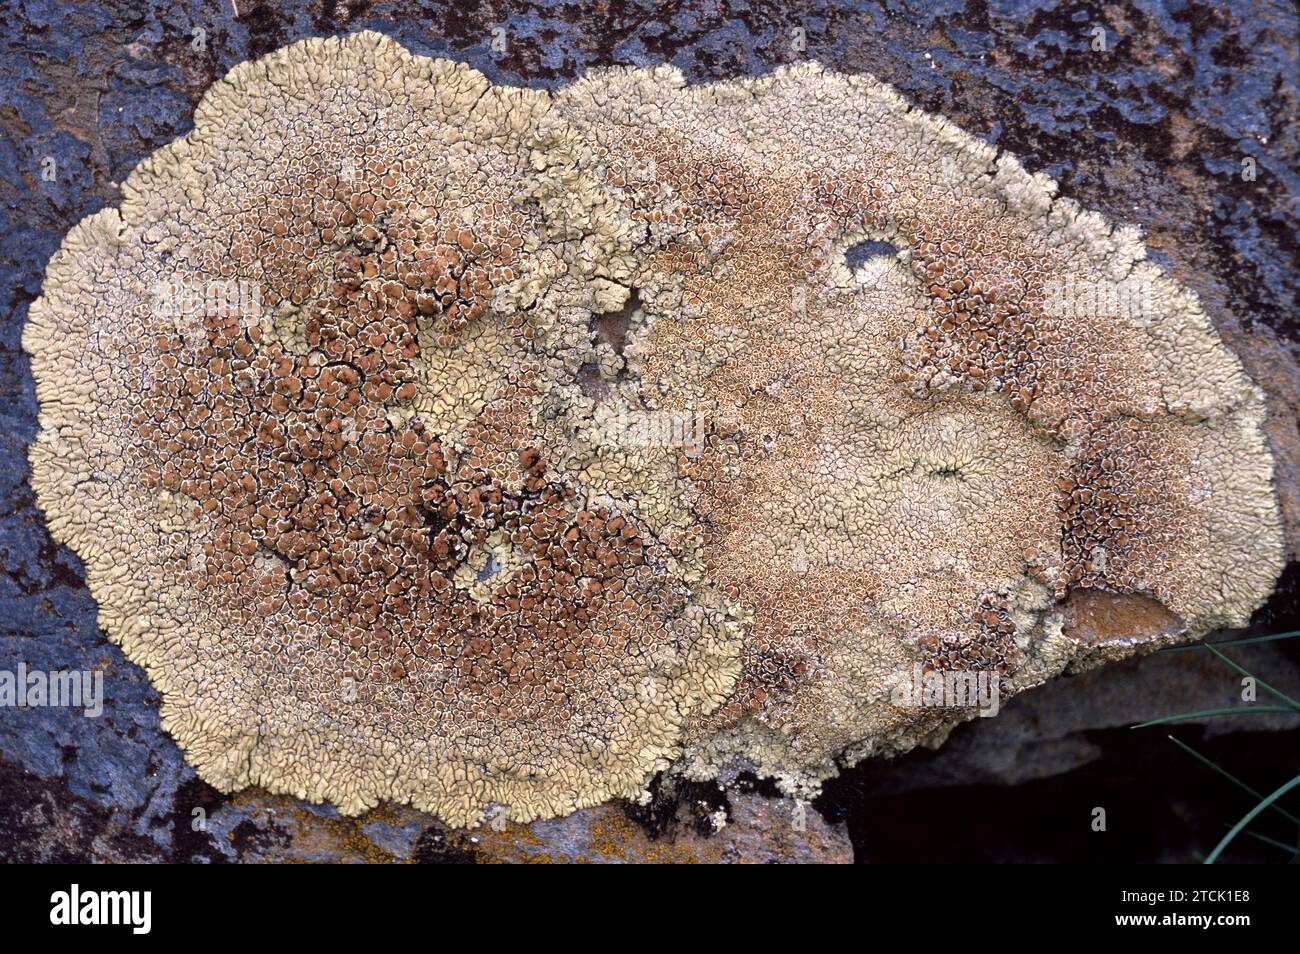 Lecanora muralis is a crustose lichen that grows on rocks. Stock Photo